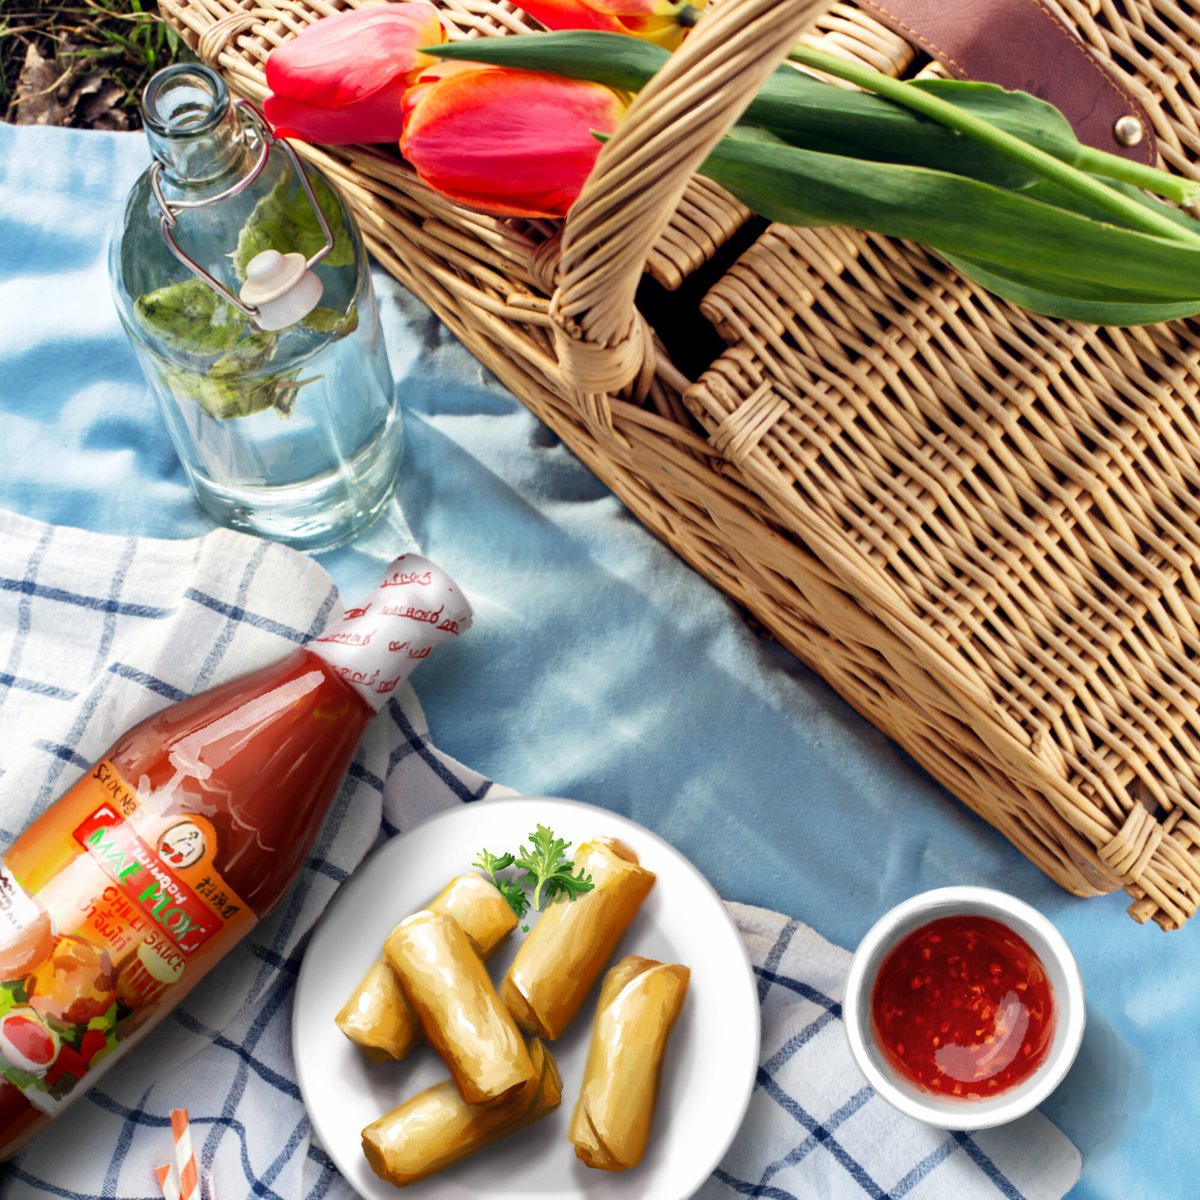 Summer is on the horizon...

What are you packing in your picnic?

#maeploy #sweetchilli #mealinspo